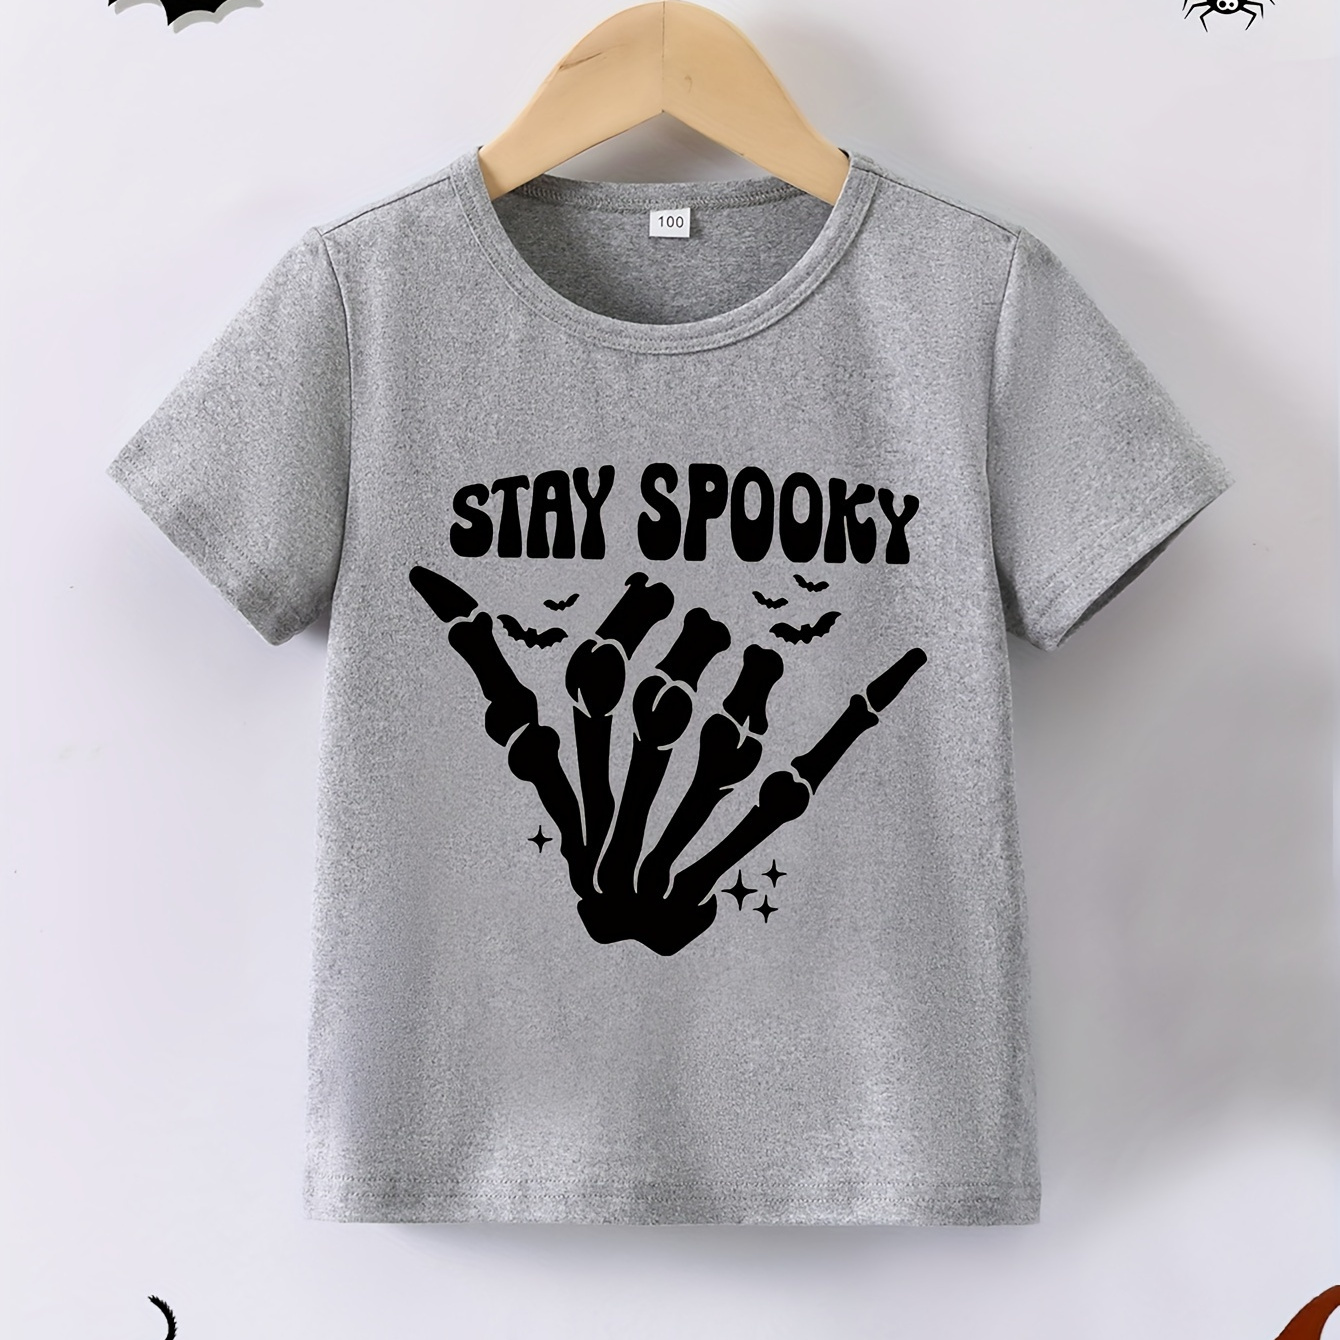 

Stay Spooky Letter Skeleton Hand Graphic Print Girl's Crew Neck Short Sleeve T-shirt, Trendy Tees, Casual Comfortable Versatile Top For Summer